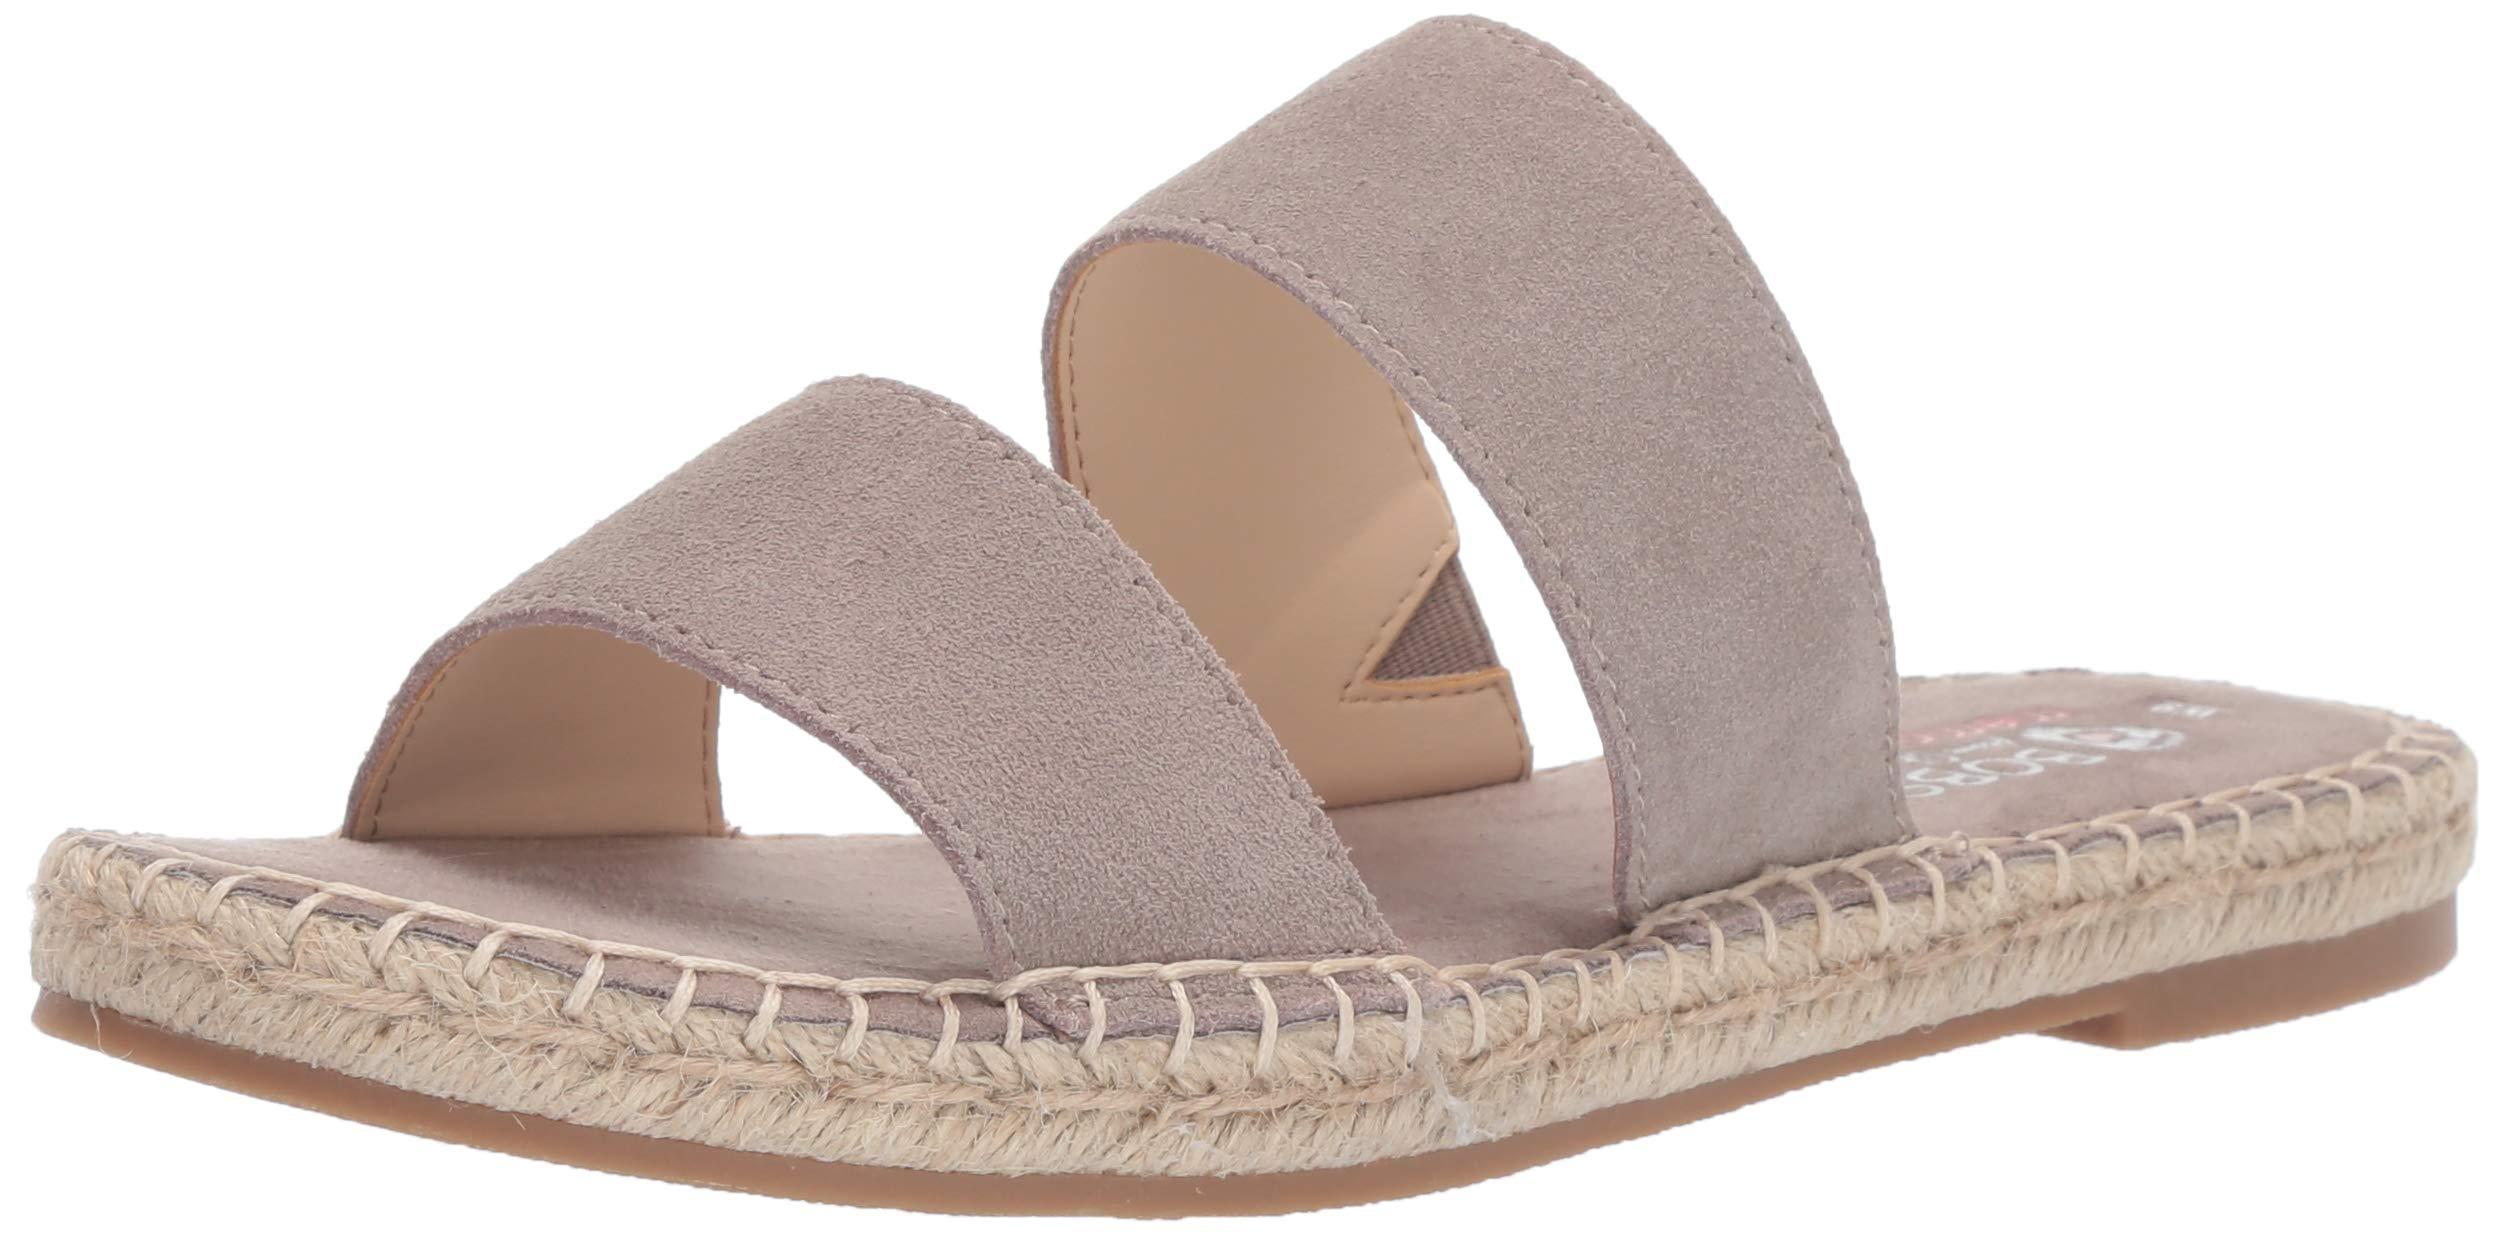 skechers two strap sandals